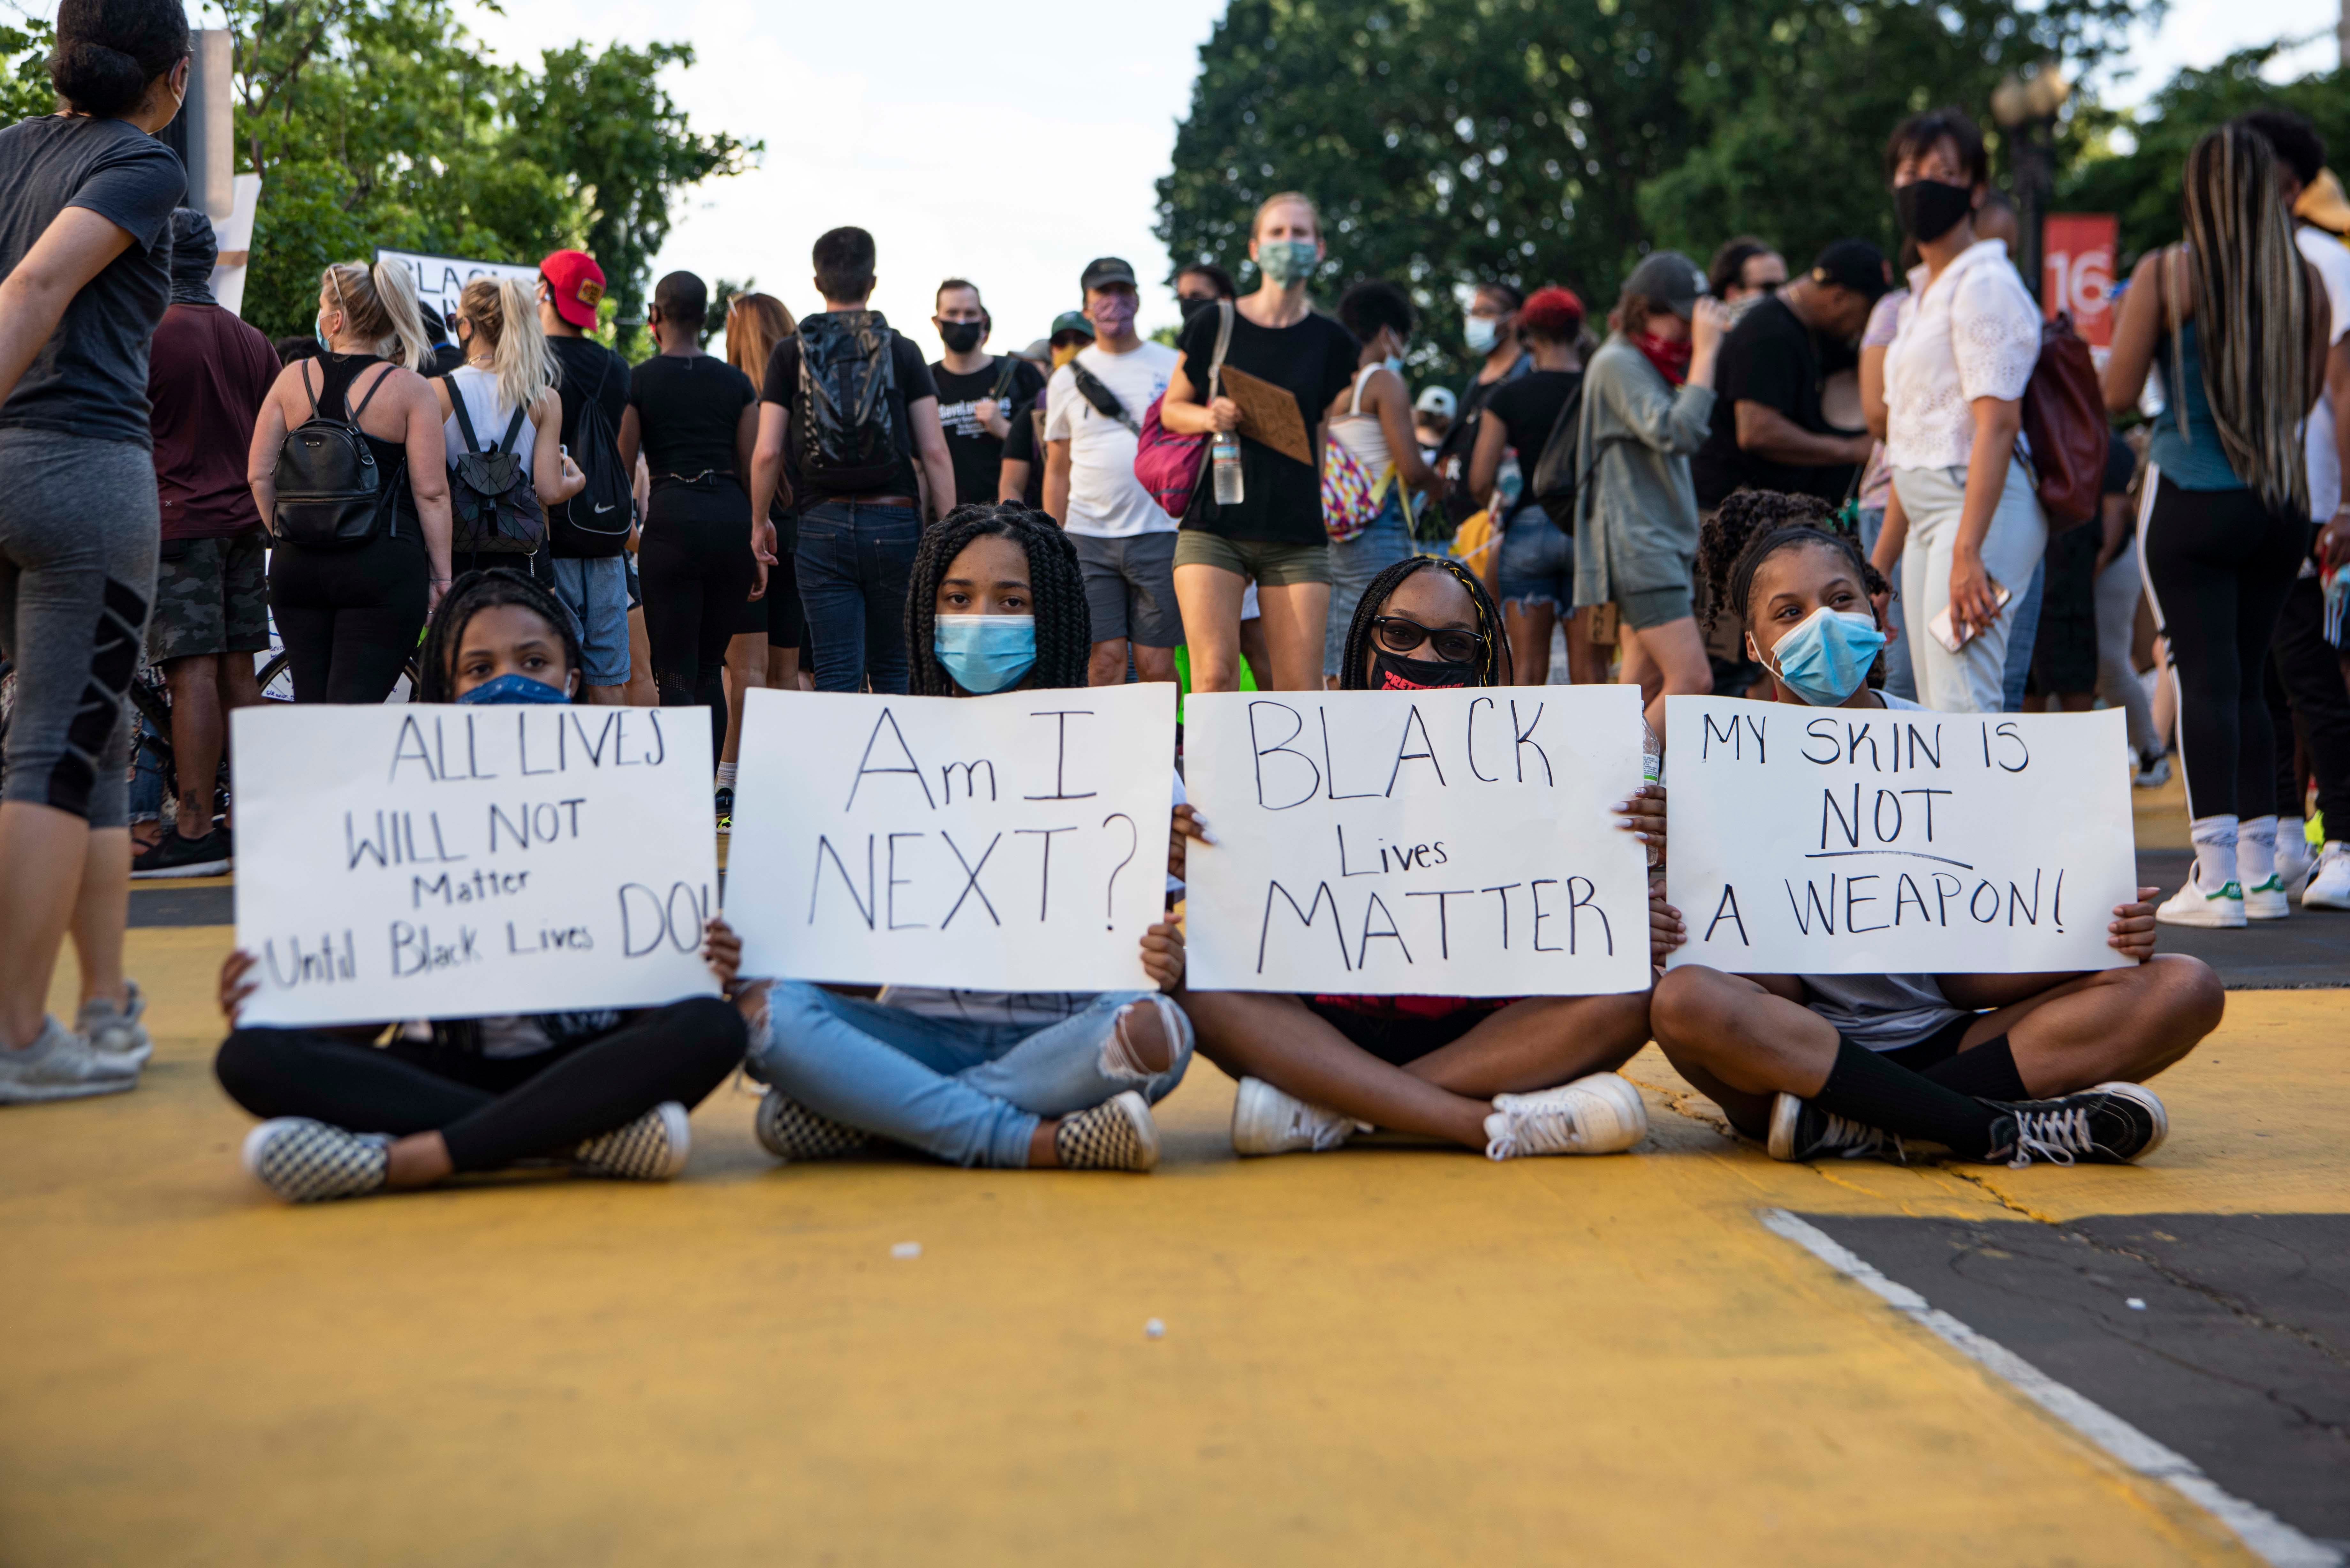 From left to right, Amari Hawkins, 14, Riley Goins, 15, Kaleigha Kendrick, 14, and Tierra Gibson, 14, hold signs on the newly renamed "Black Lives Matter Plaza" on 16th and I streets in downtown Washington, D.C., on Saturday, June 6, 2020. Protests continued following the death of George Floyd.